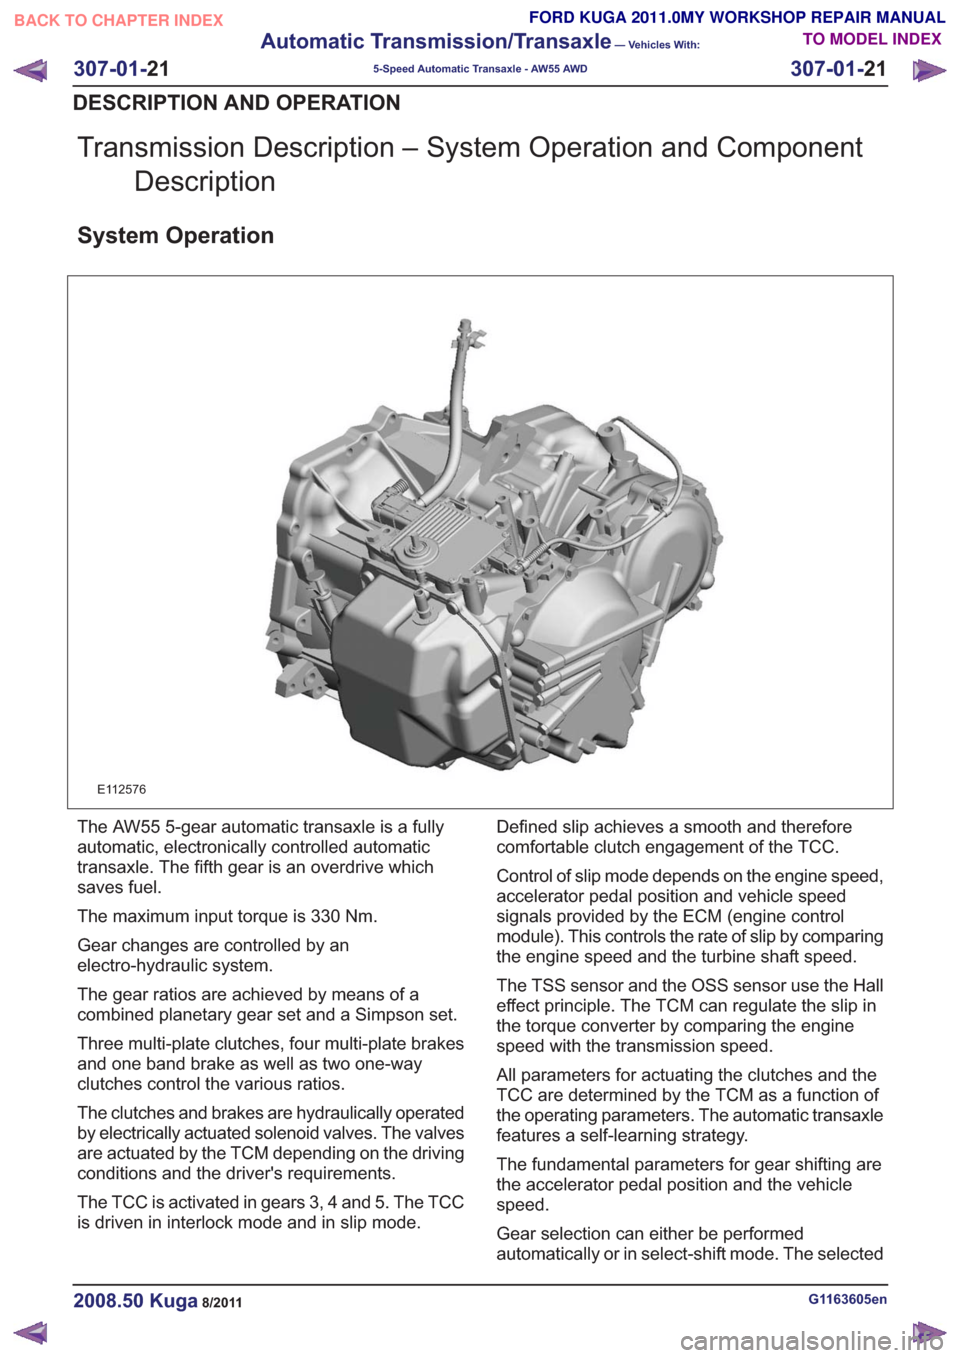 FORD KUGA 2011 1.G User Guide Transmission Description – System Operation and ComponentDescription
System Operation
E112576
The AW55 5-gear automatic transaxle is a fully
automatic, electronically controlled automatic
transaxle.